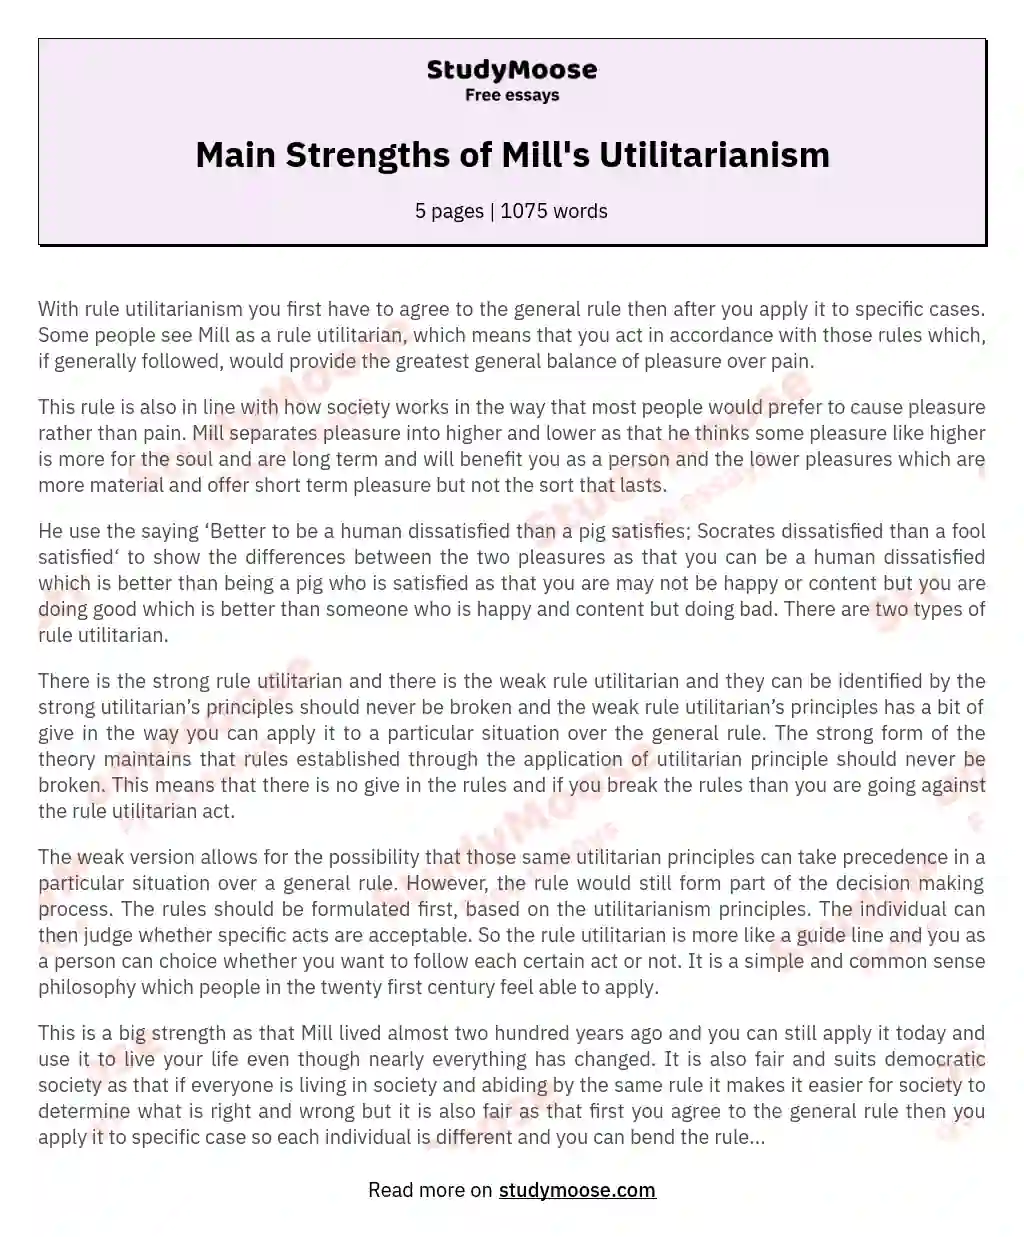 Main Strengths of Mill's Utilitarianism essay